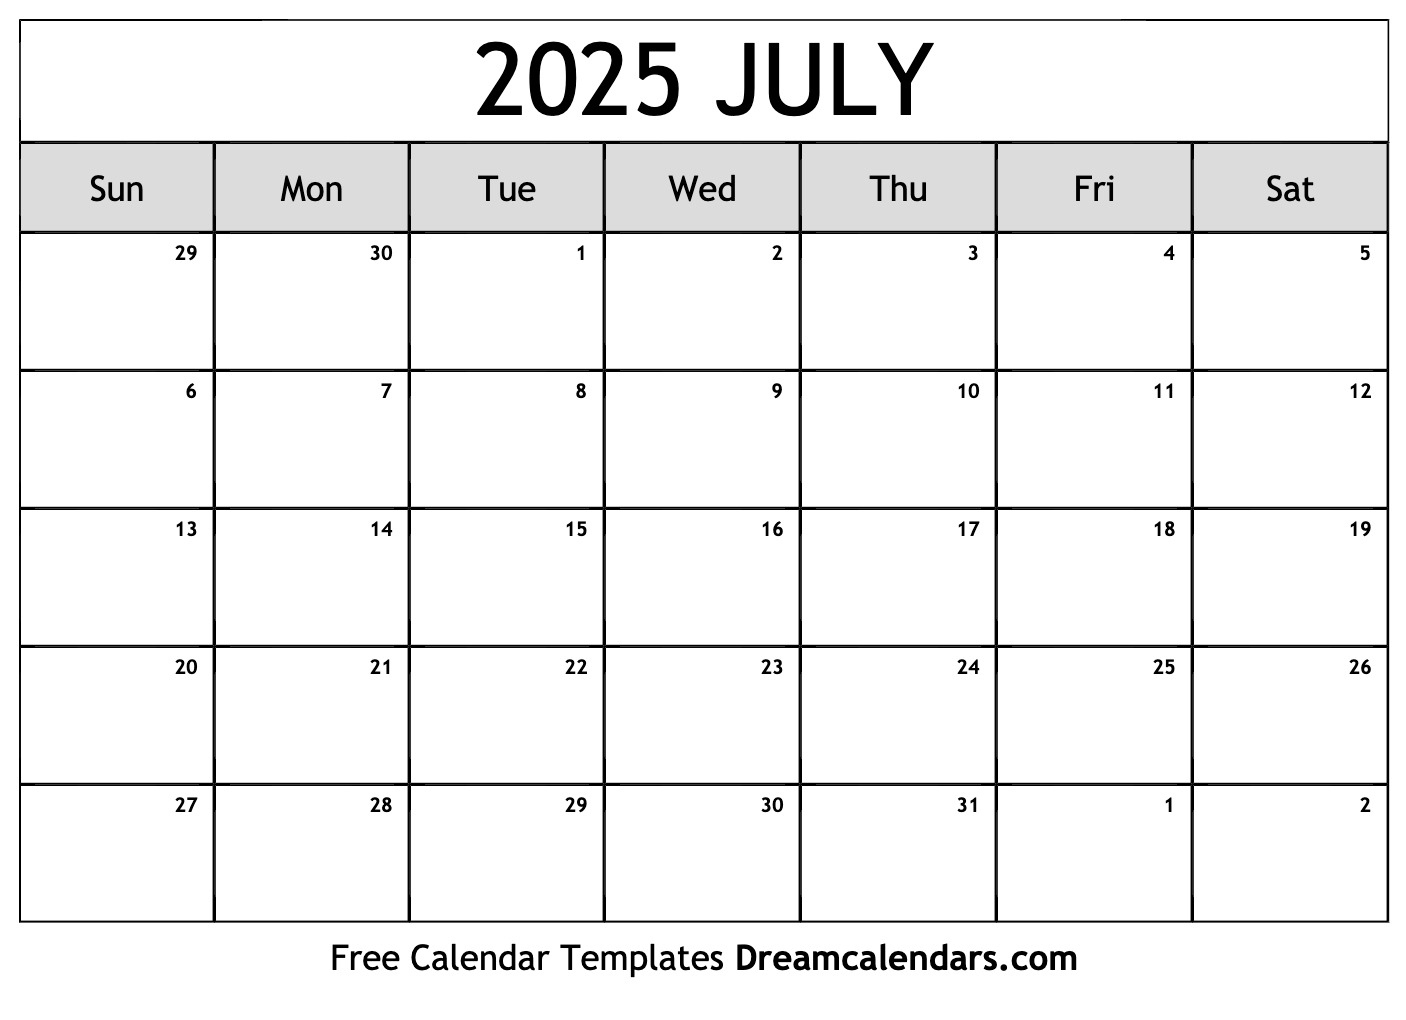 July 2025 Calendar - Free Printable With Holidays And Observances | Calendar For July 2025